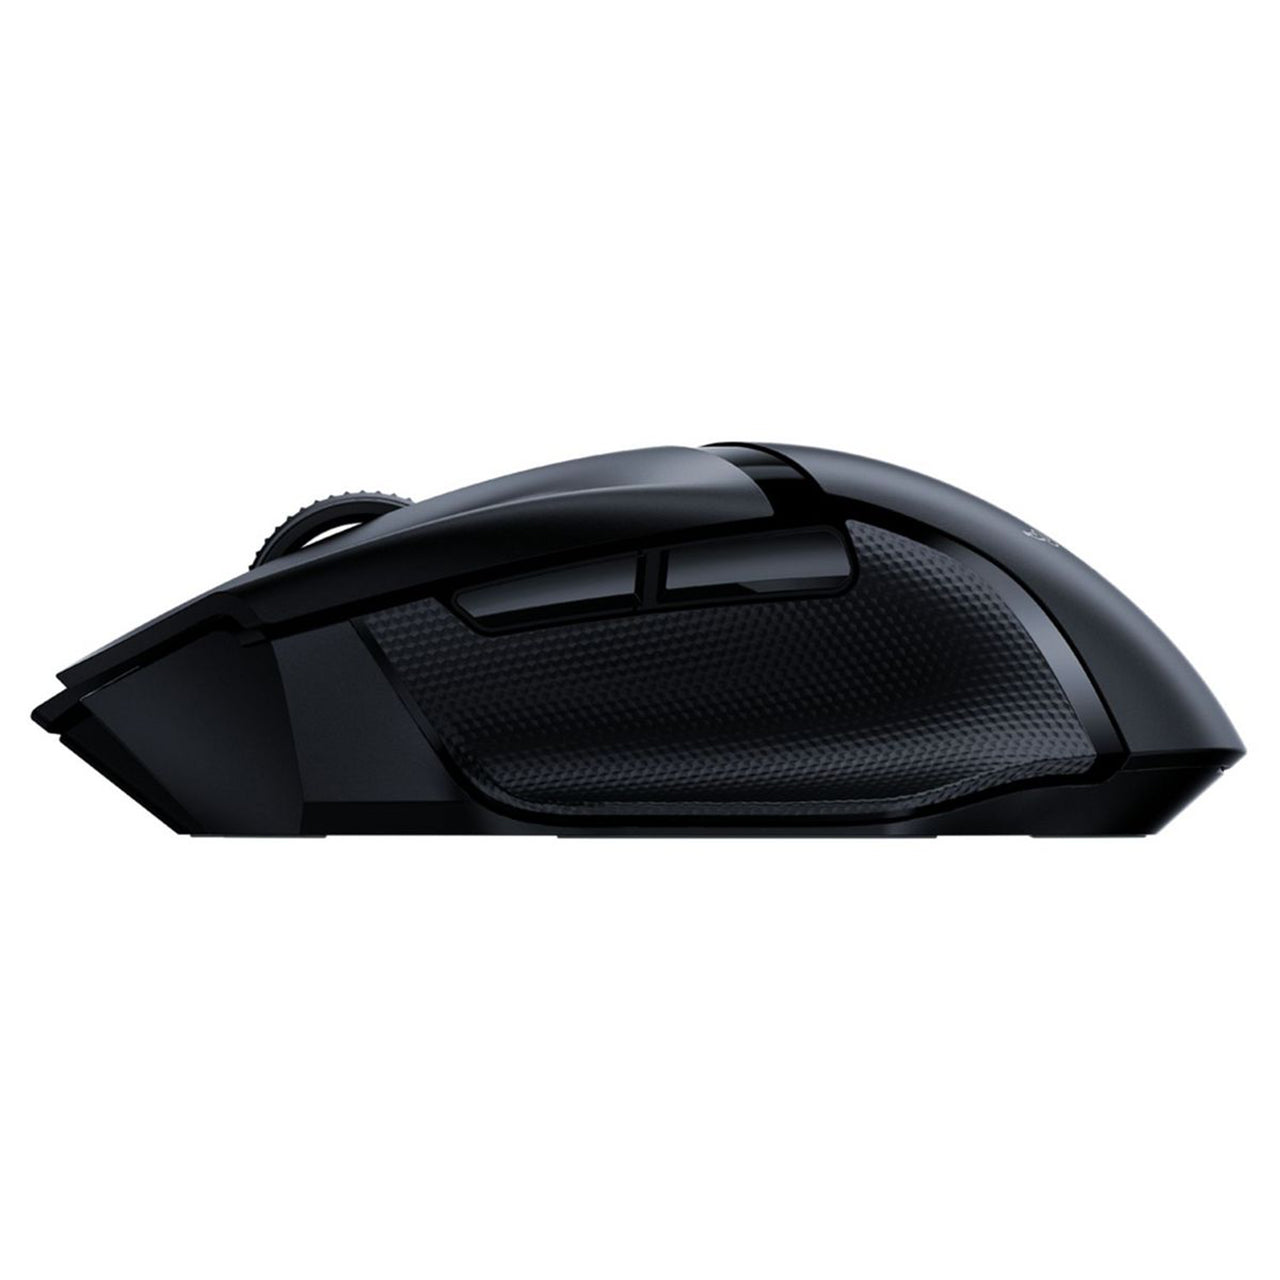 Razer Basilisk X HyperSpeed Wireless Gaming Mouse 16000 DPI with 5G Advanced Optical Sensor, Bluetooth, 450h Battery Life, 6 Programmable Buttons